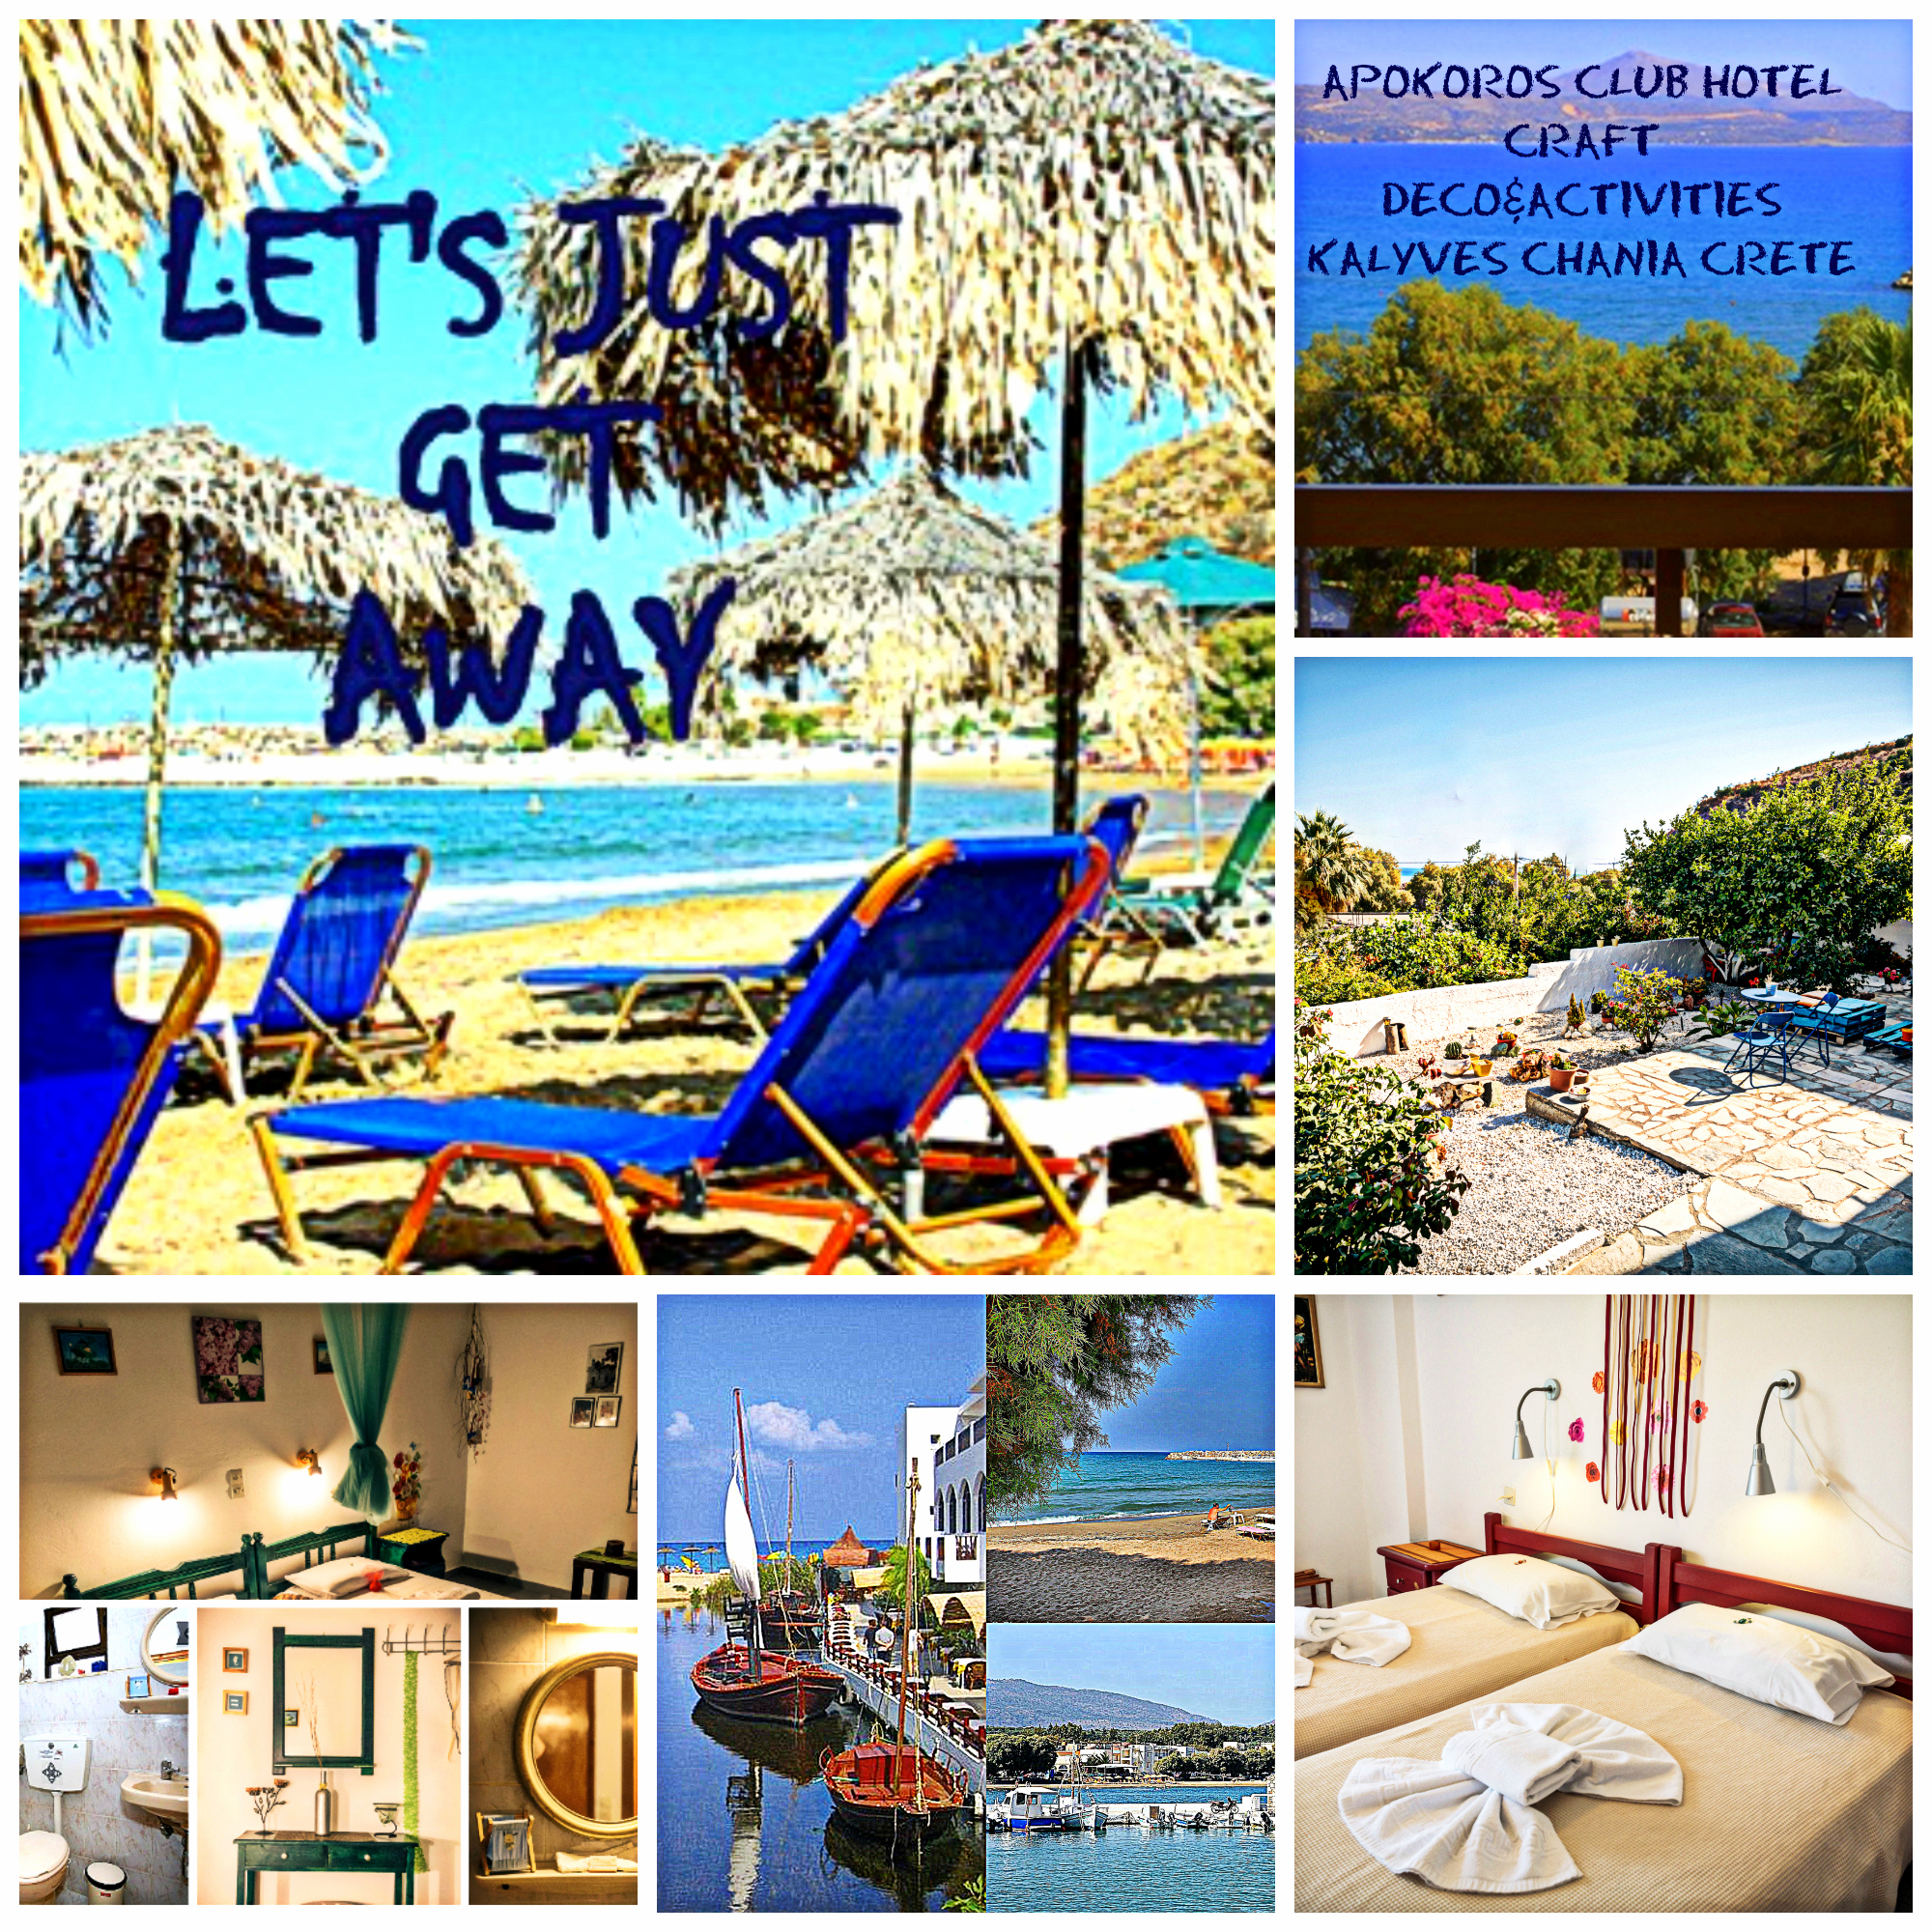 Charming Vacations in Kalyves Crete Greece at Apokoros Club Hotel Craft Deco&Activities